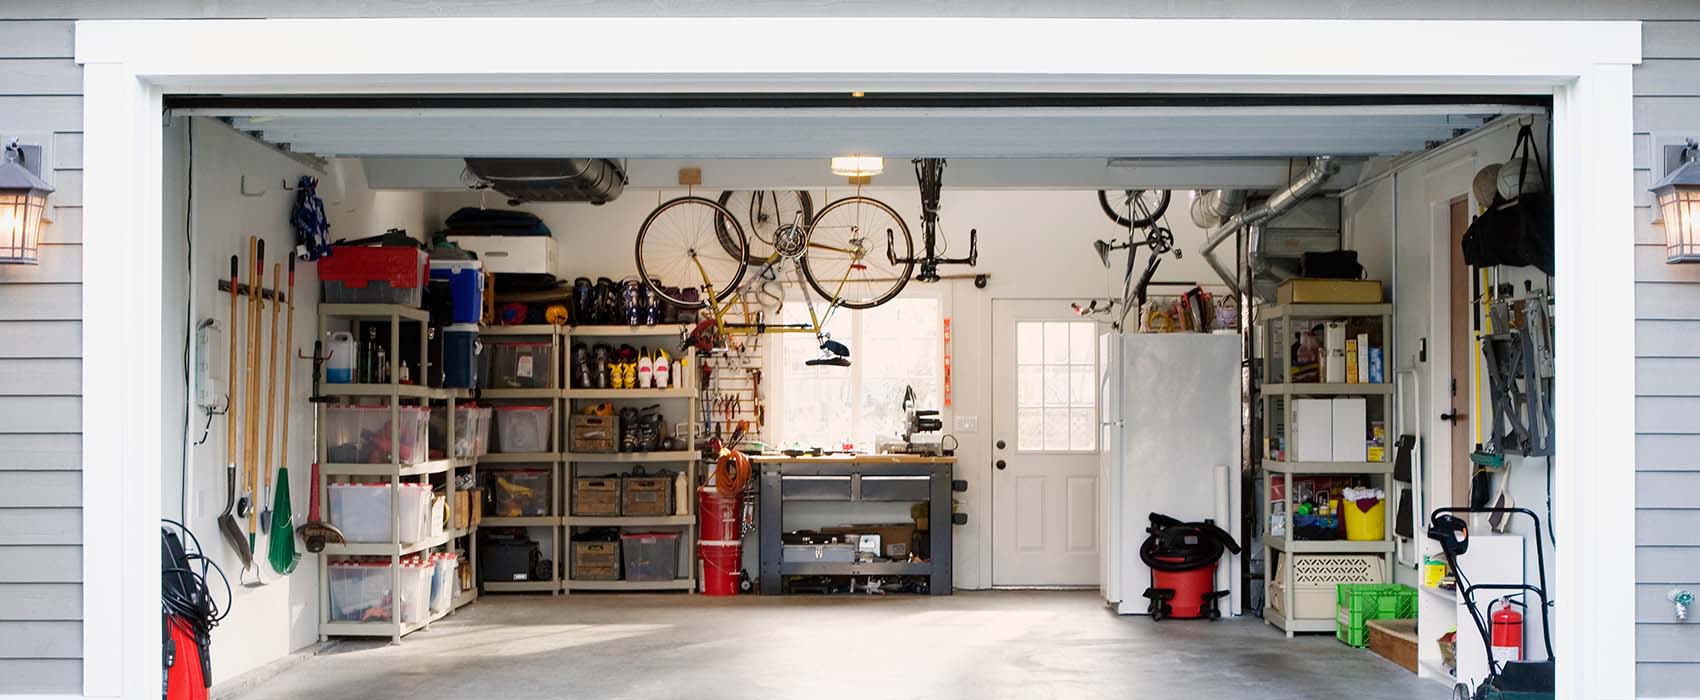 View into a home's garage